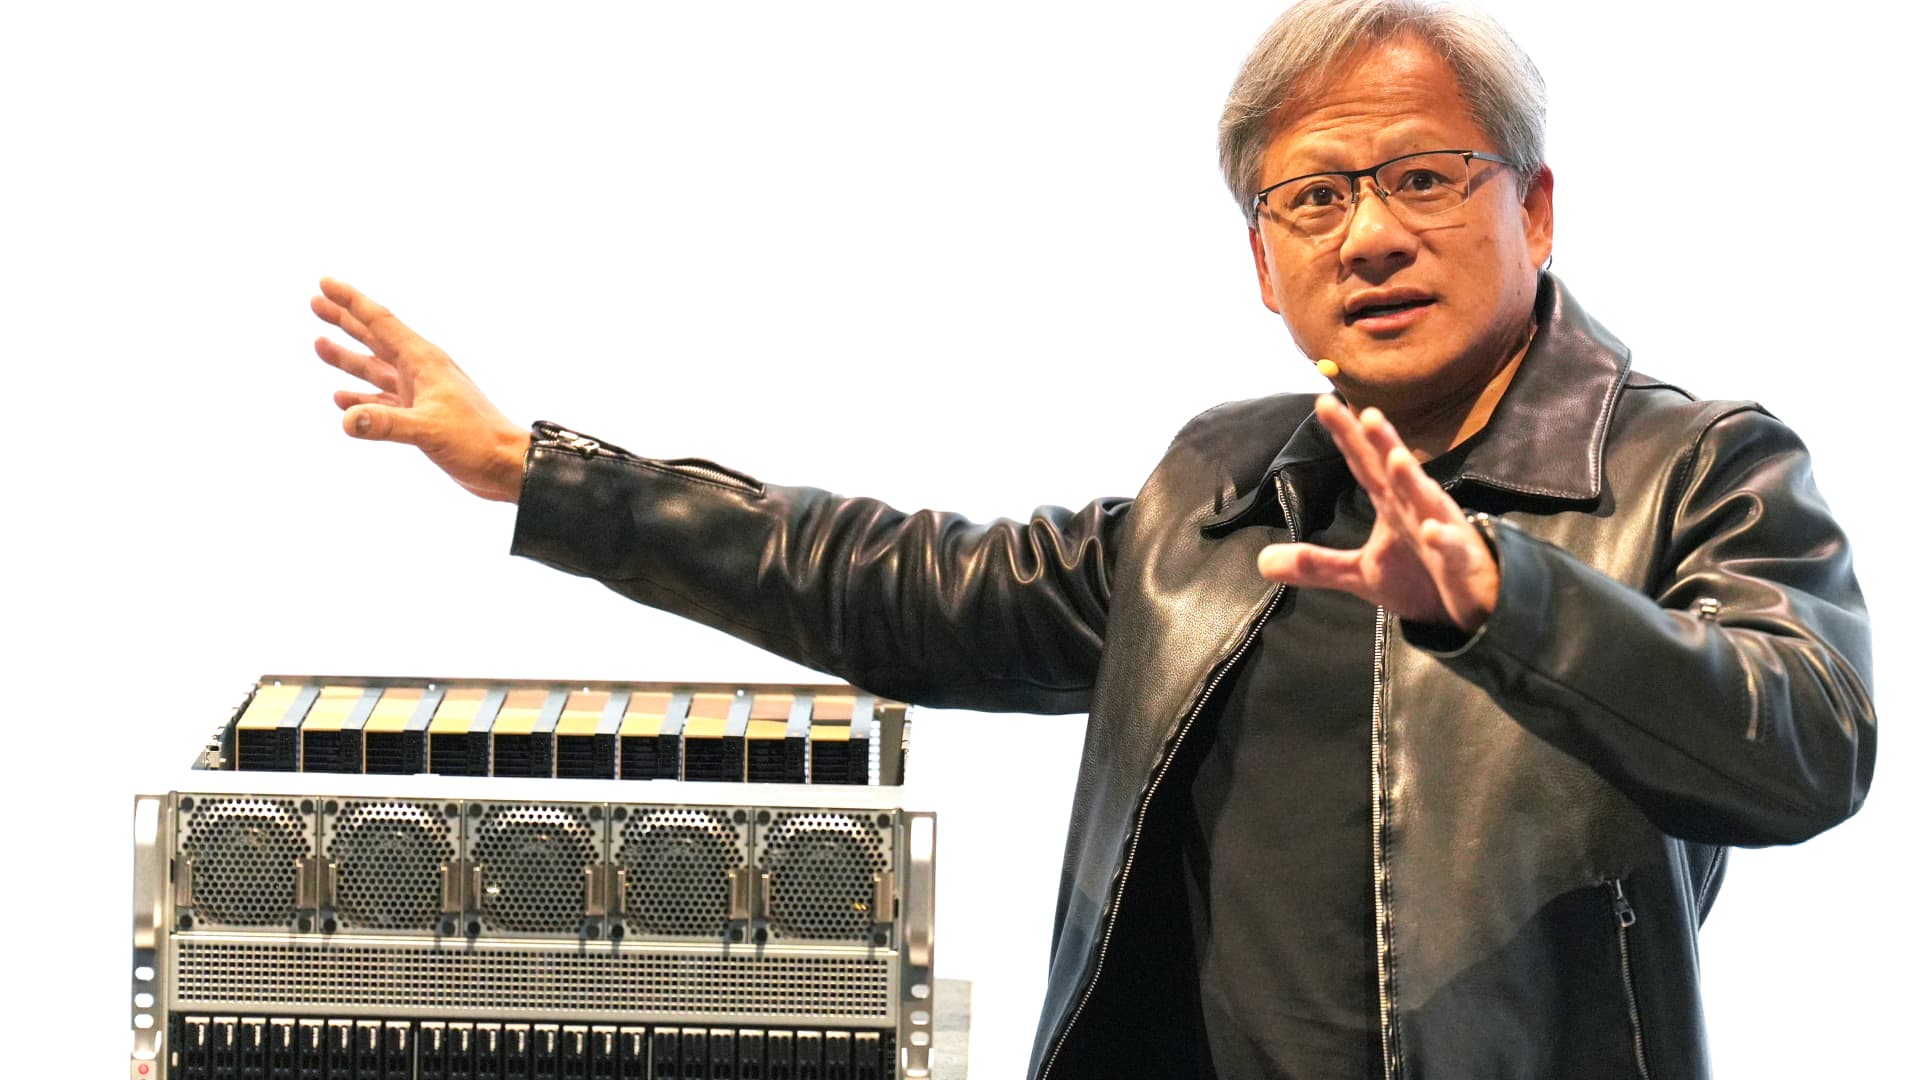 Nvidia’s AI-driven stock surge pushed earnings multiple three times higher than Tesla’s